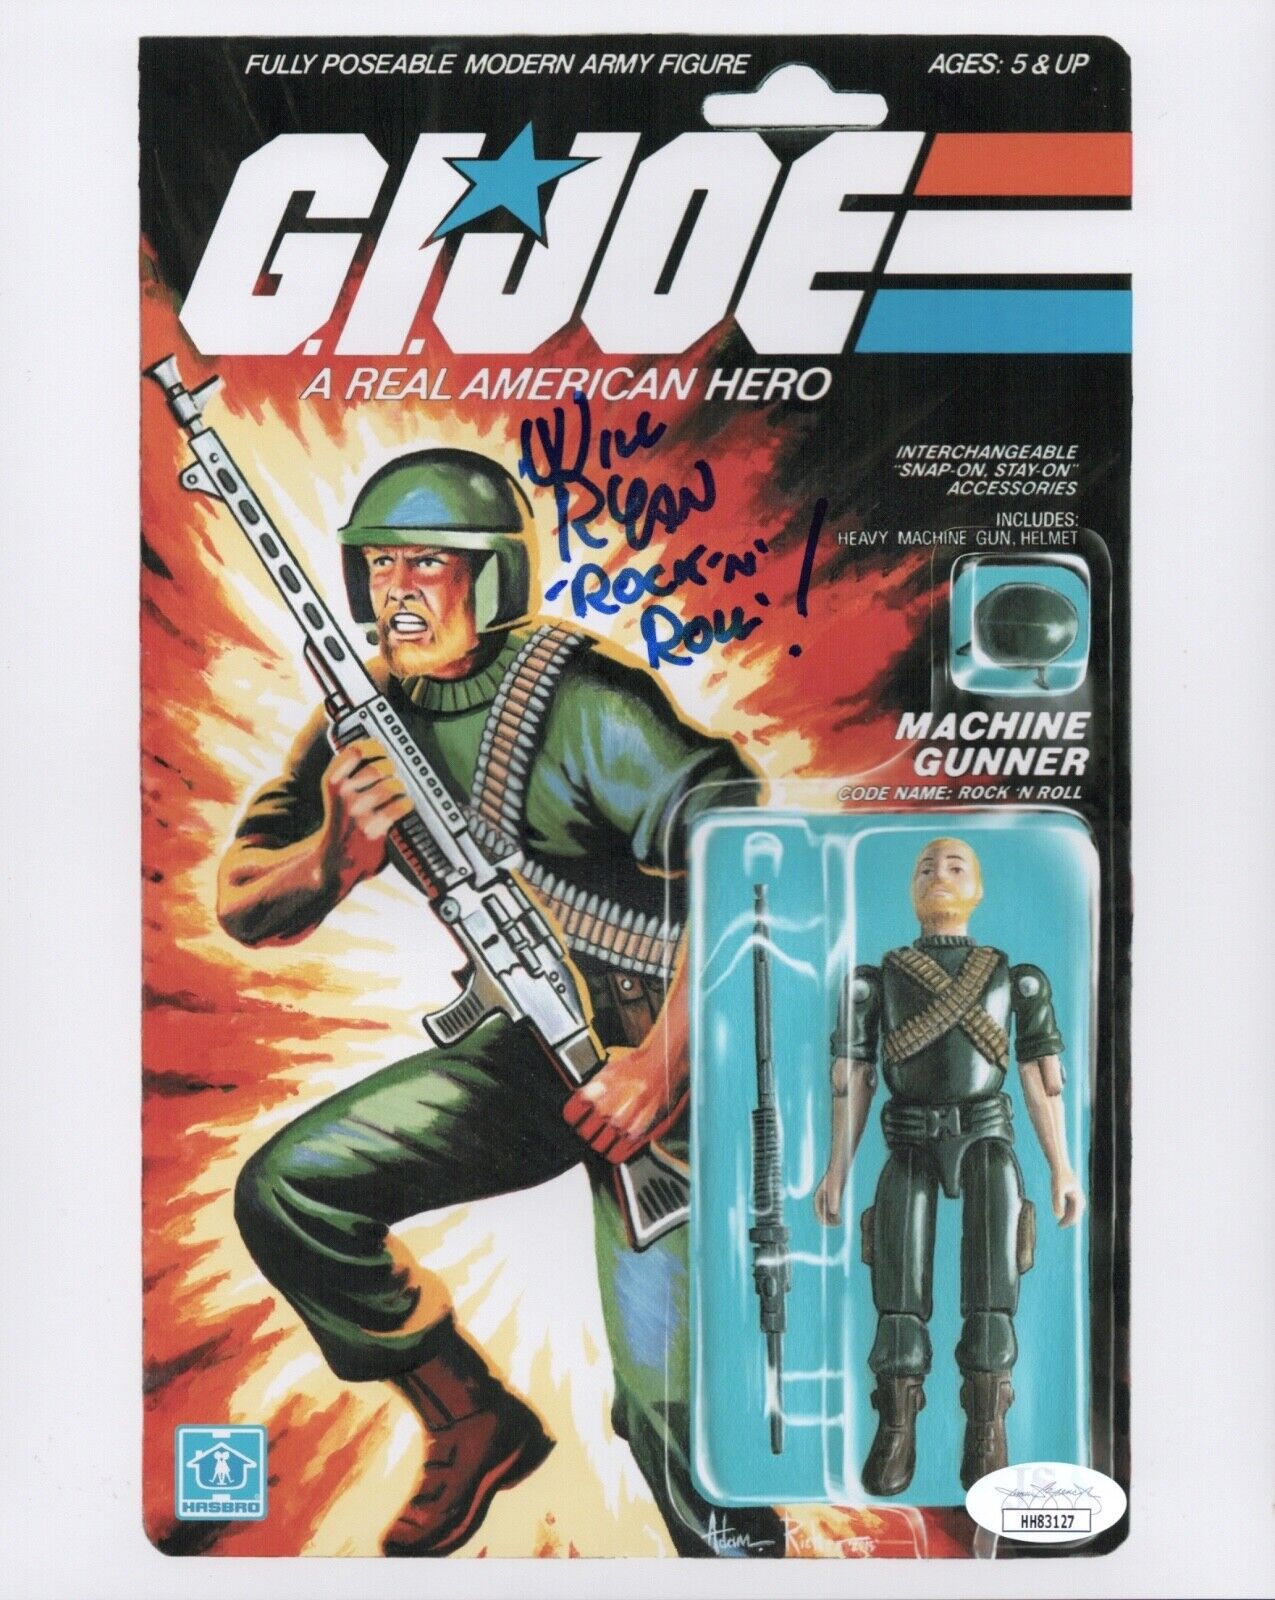 WILL RYAN Signed ROCK N' ROLL G.I. Joe 8x10 Photo Poster painting In Person Autograph JSA COA